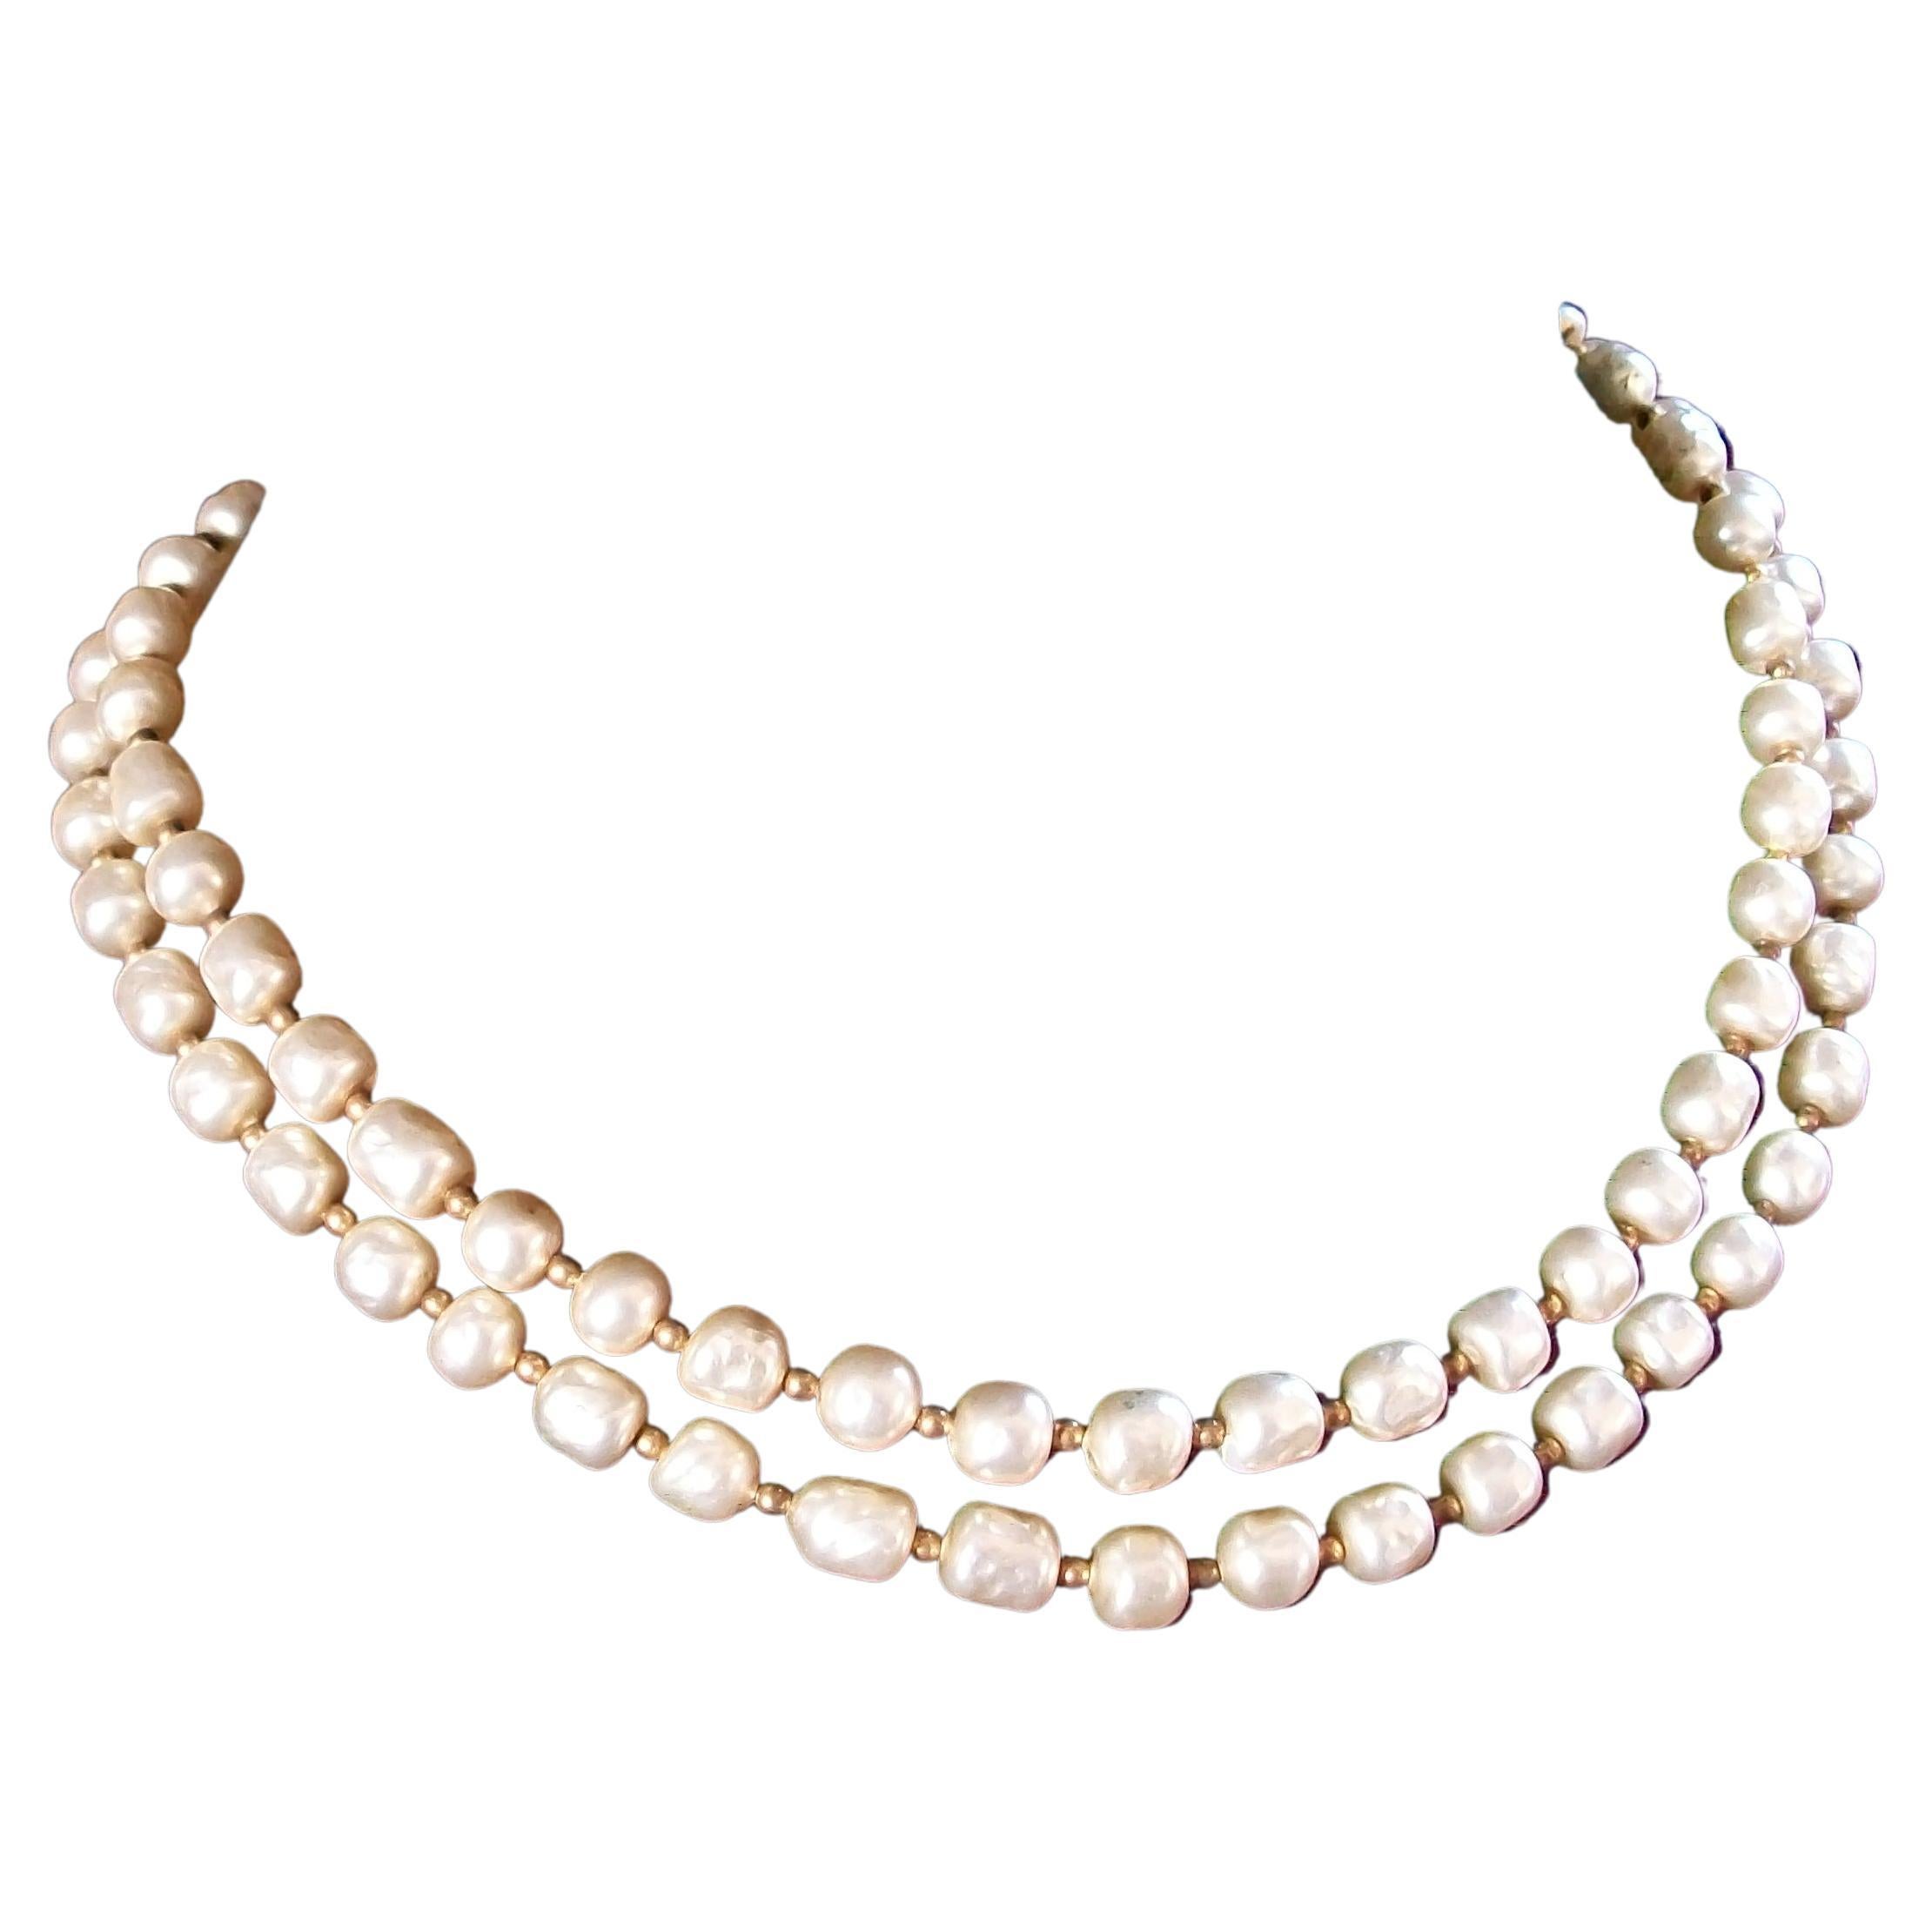 Miriam Haskell Style Faux Baroque Pearl & Bead Necklace, U.S, circa 1960s For Sale